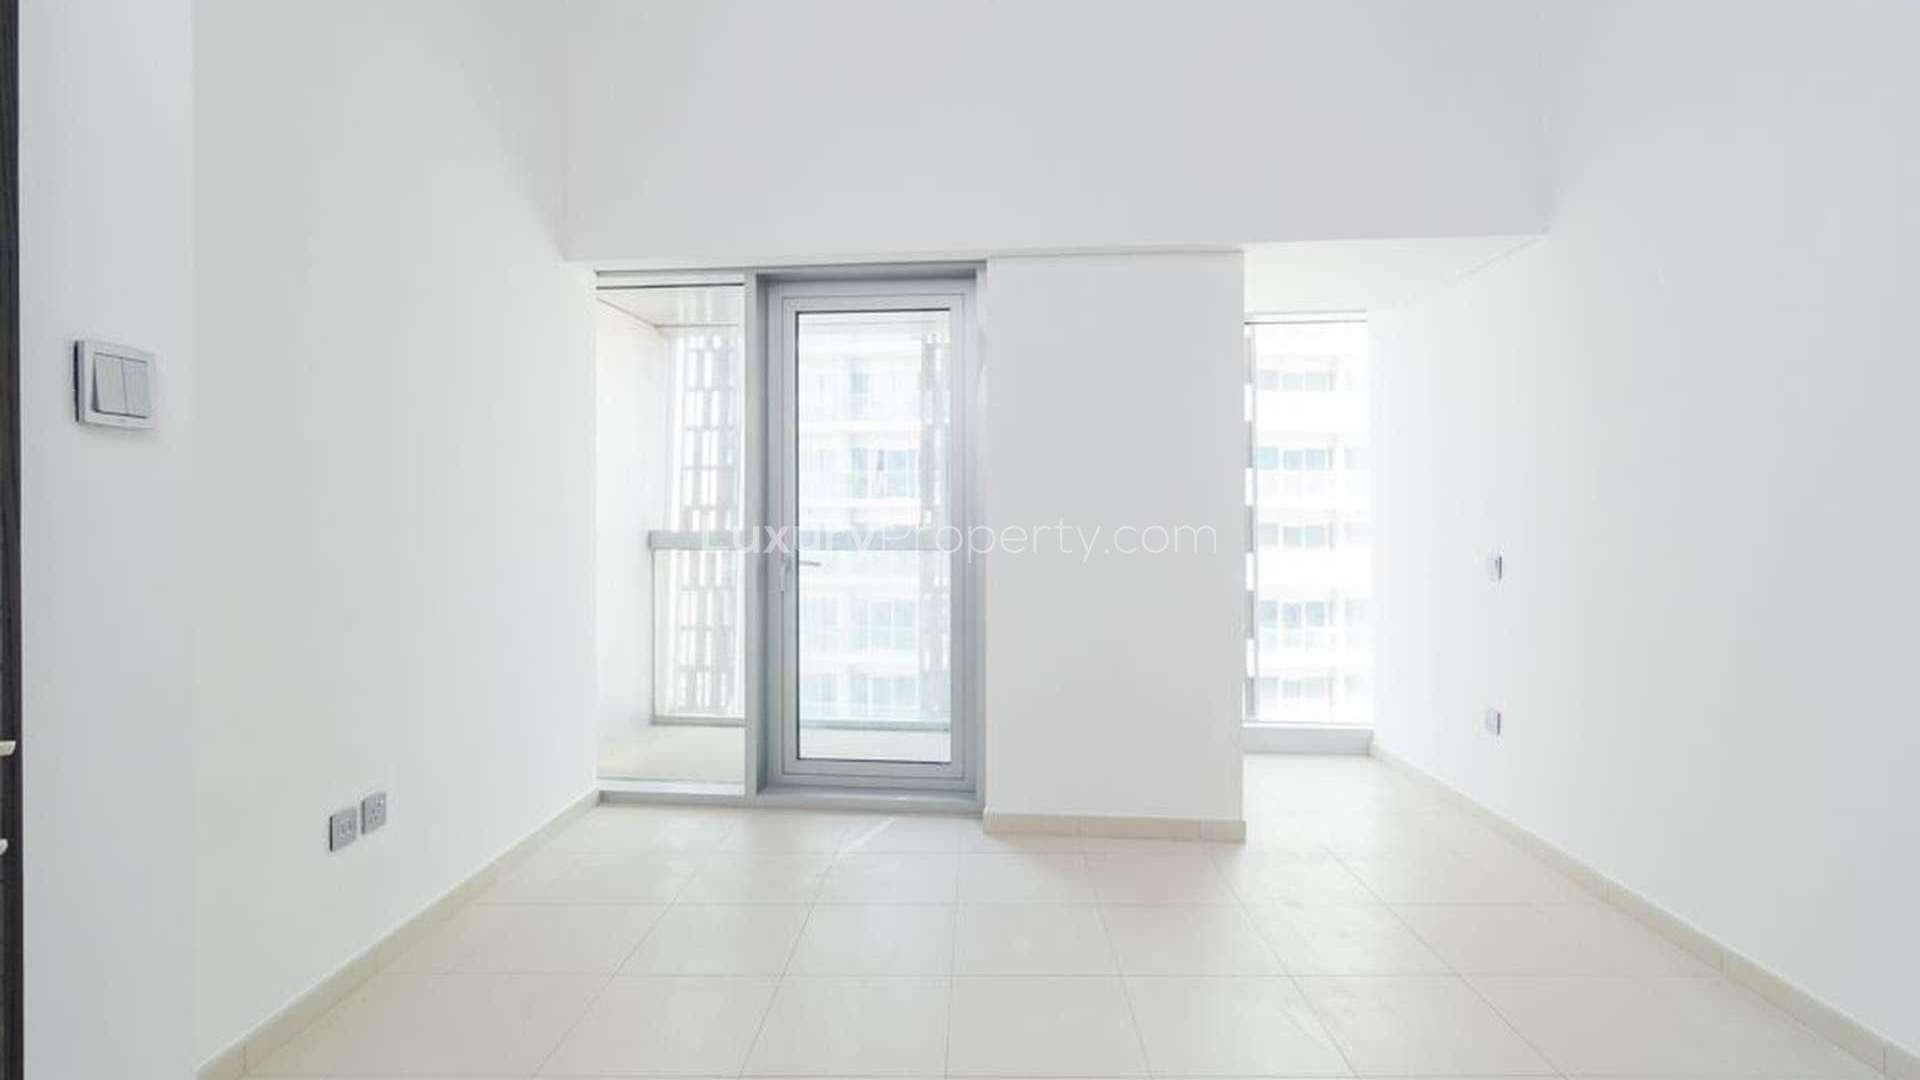 2 Bedroom Apartment For Rent Cayan Tower Lp32719 19a54a4bd5610400.jpg